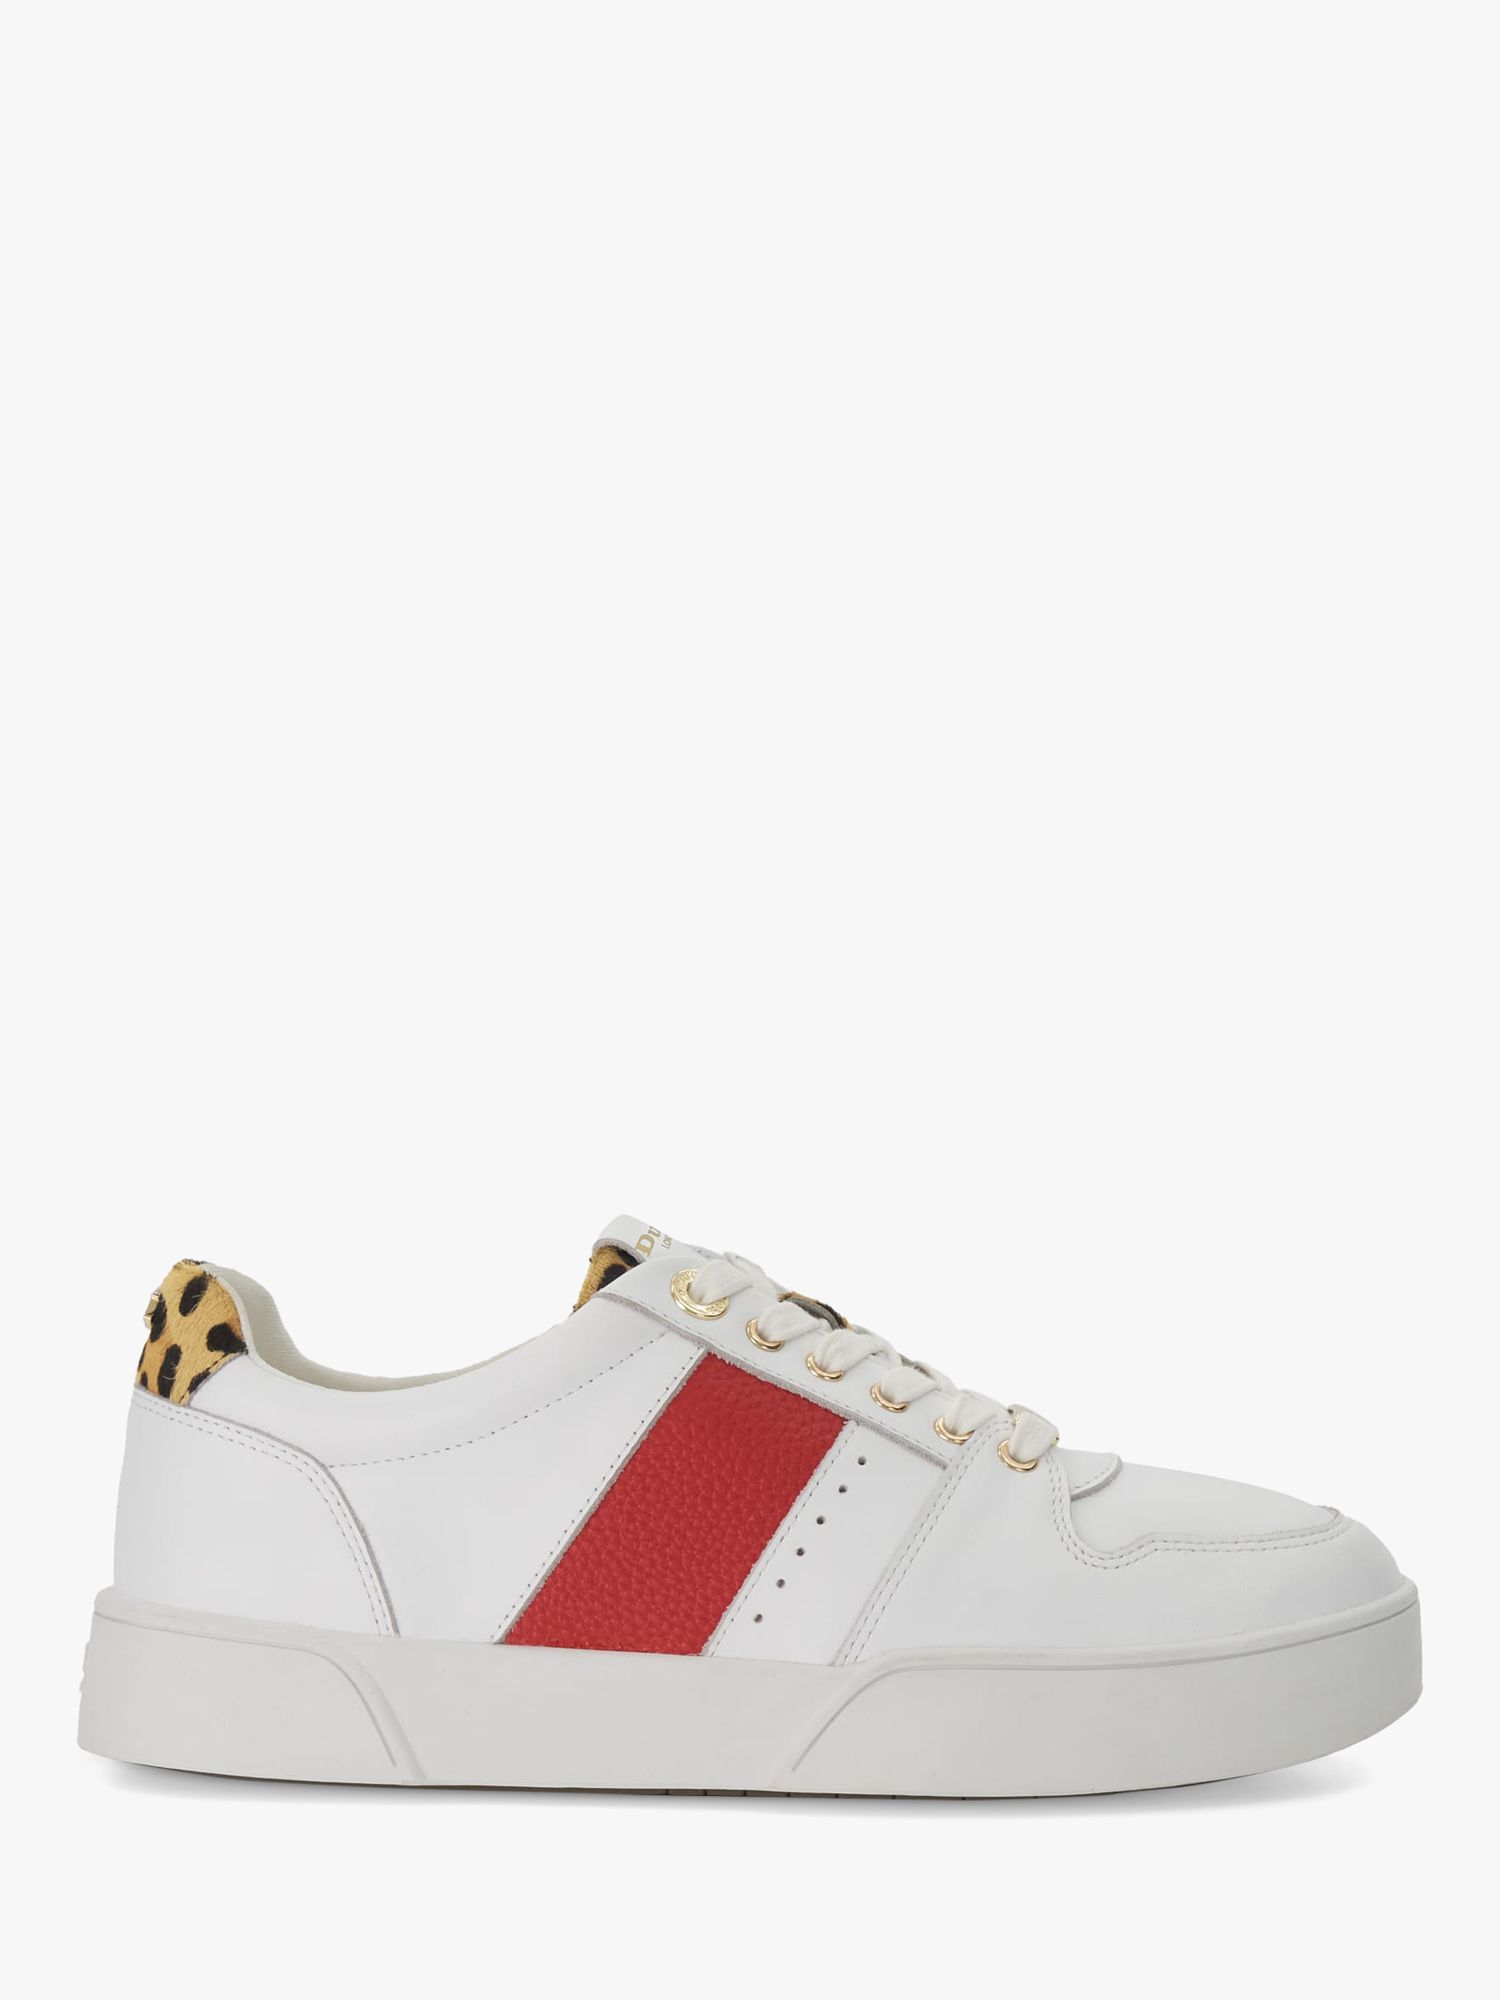 Dune Elysium Leather Side Stripe Trainers, Red at John Lewis & Partners